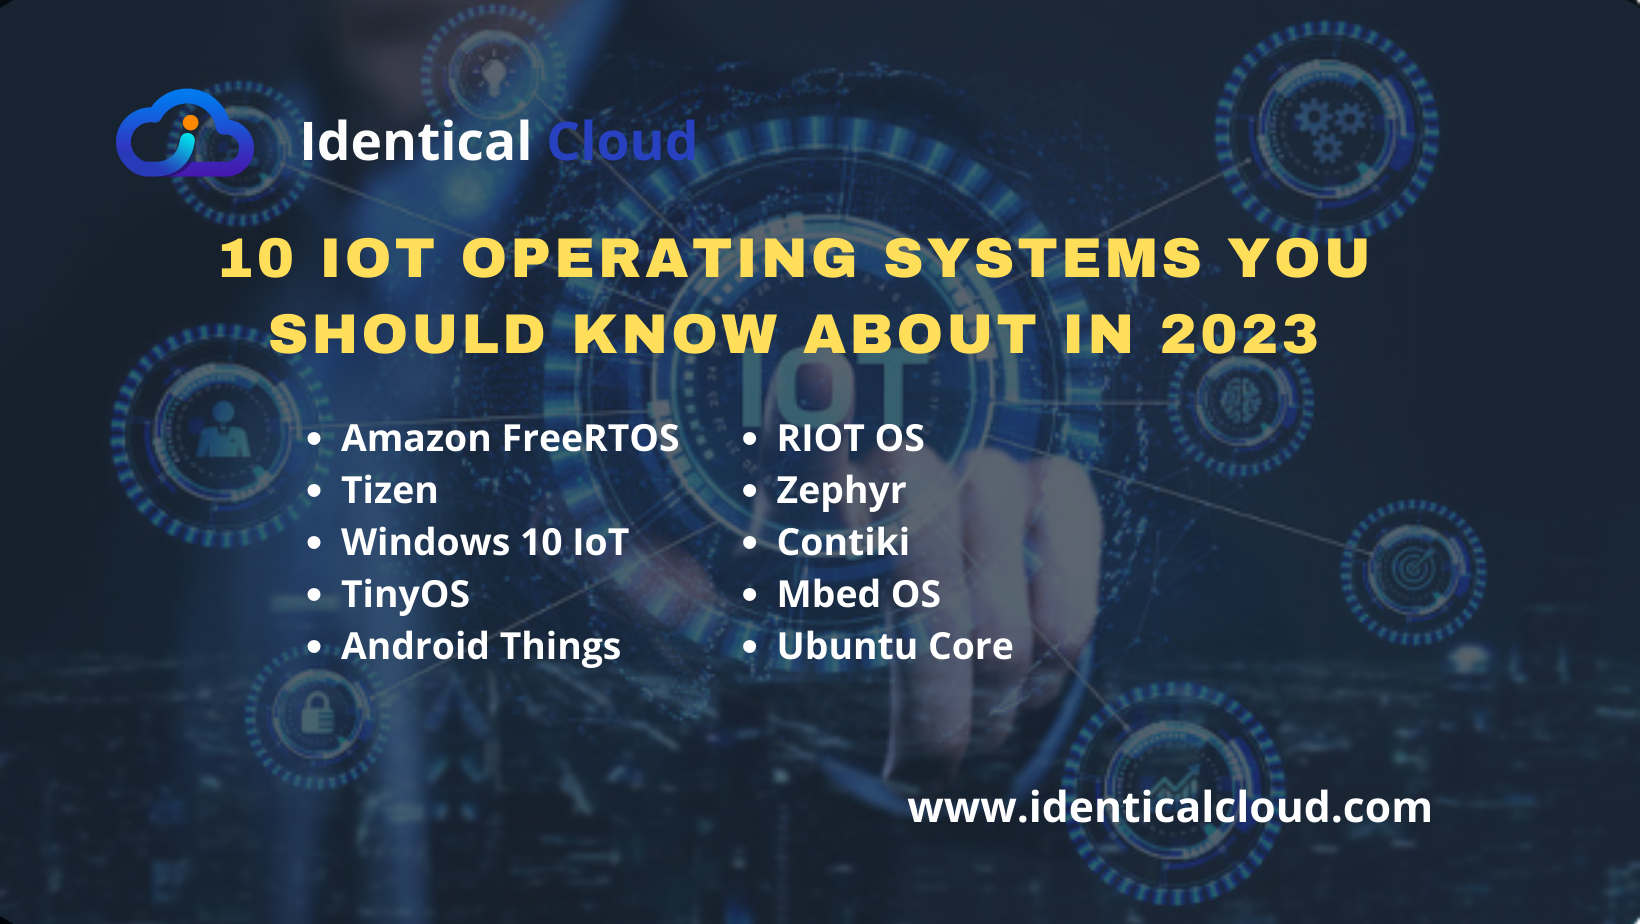 10 IoT Operating Systems You Should Know About in 2023 - identicalcloud.com